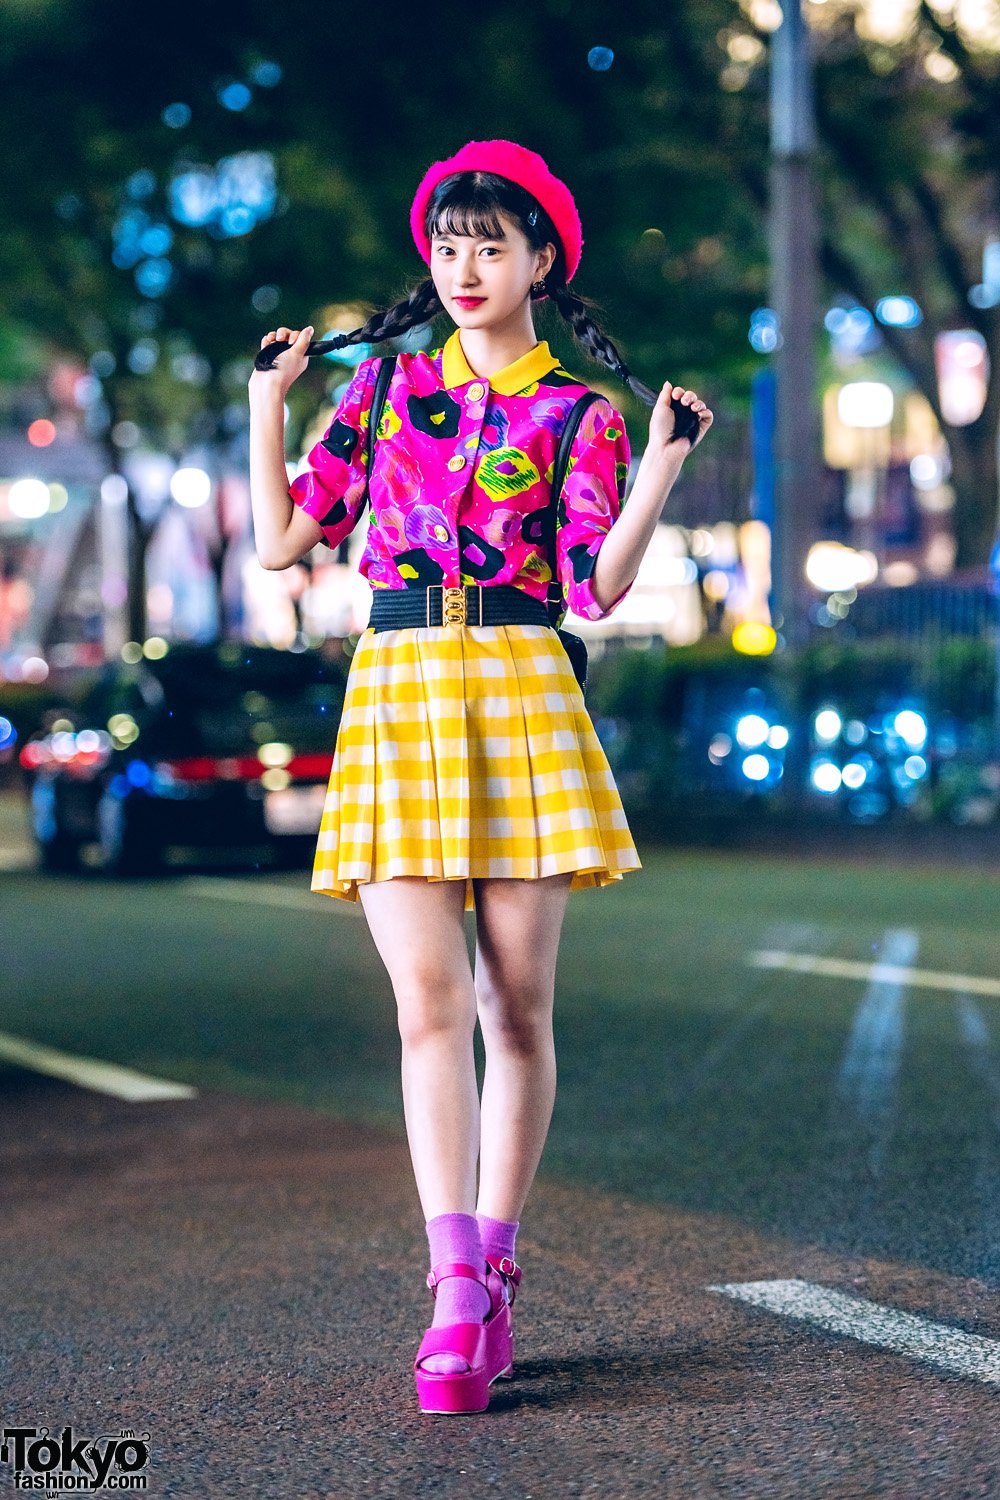 Tokyo Fashion on X: 14-year-old Japanese model and aspiring actress A-pon  (@a_ponnnnnn) on the street in Harajuku wearing a cheerful look featuring a  vintage print top, vintage checkered skirt, pink WEGO platform